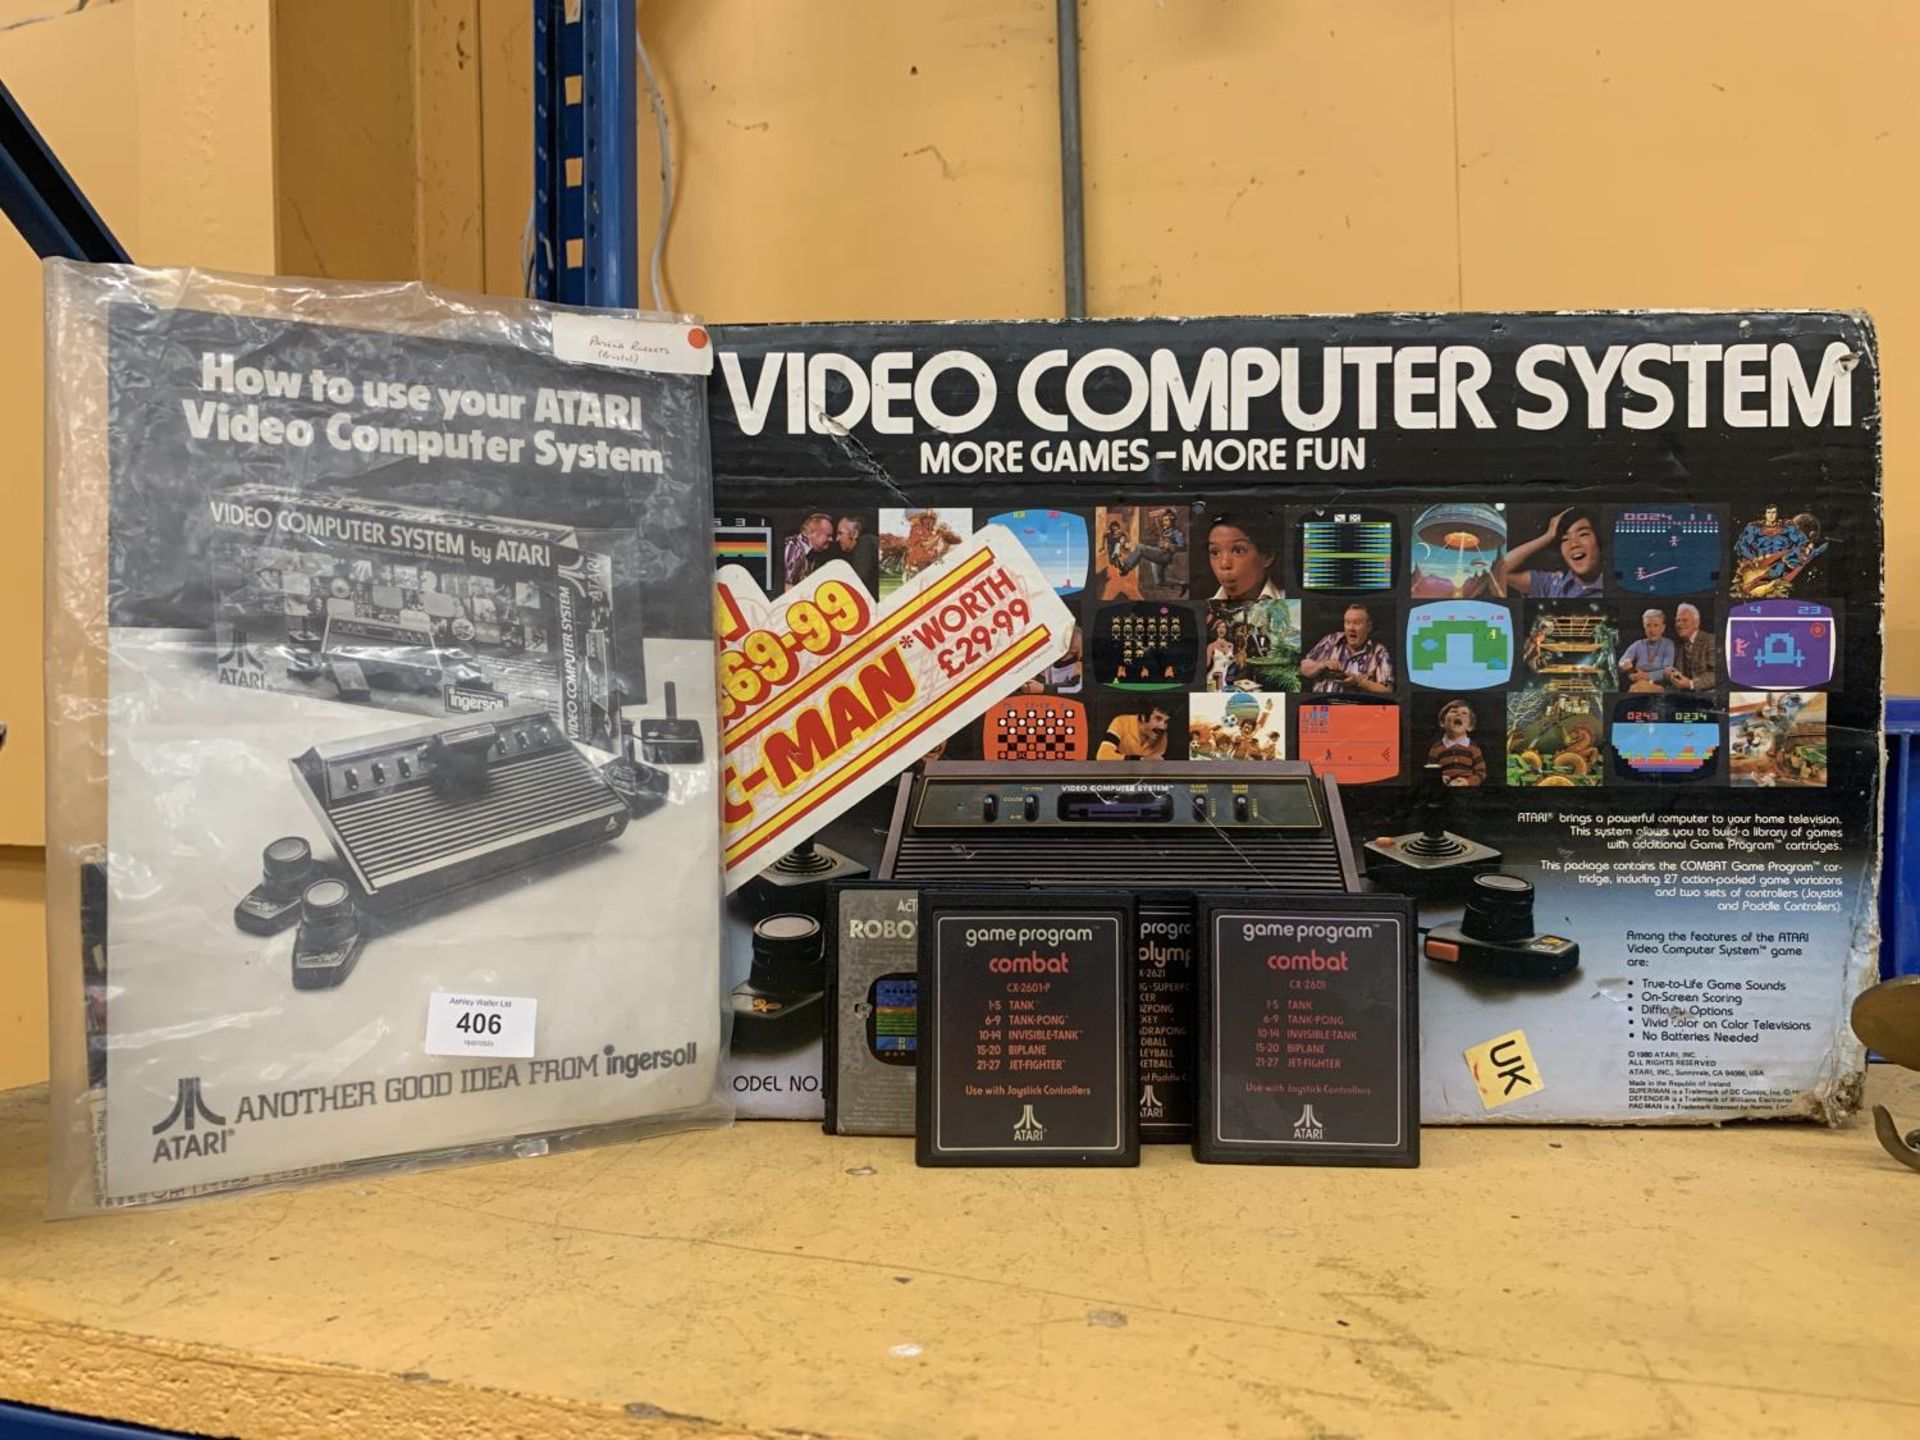 AN ATARI VIDEO COMPUTER SYSTEM, BOXED WITH INSTRUCTIONS AND GAMES